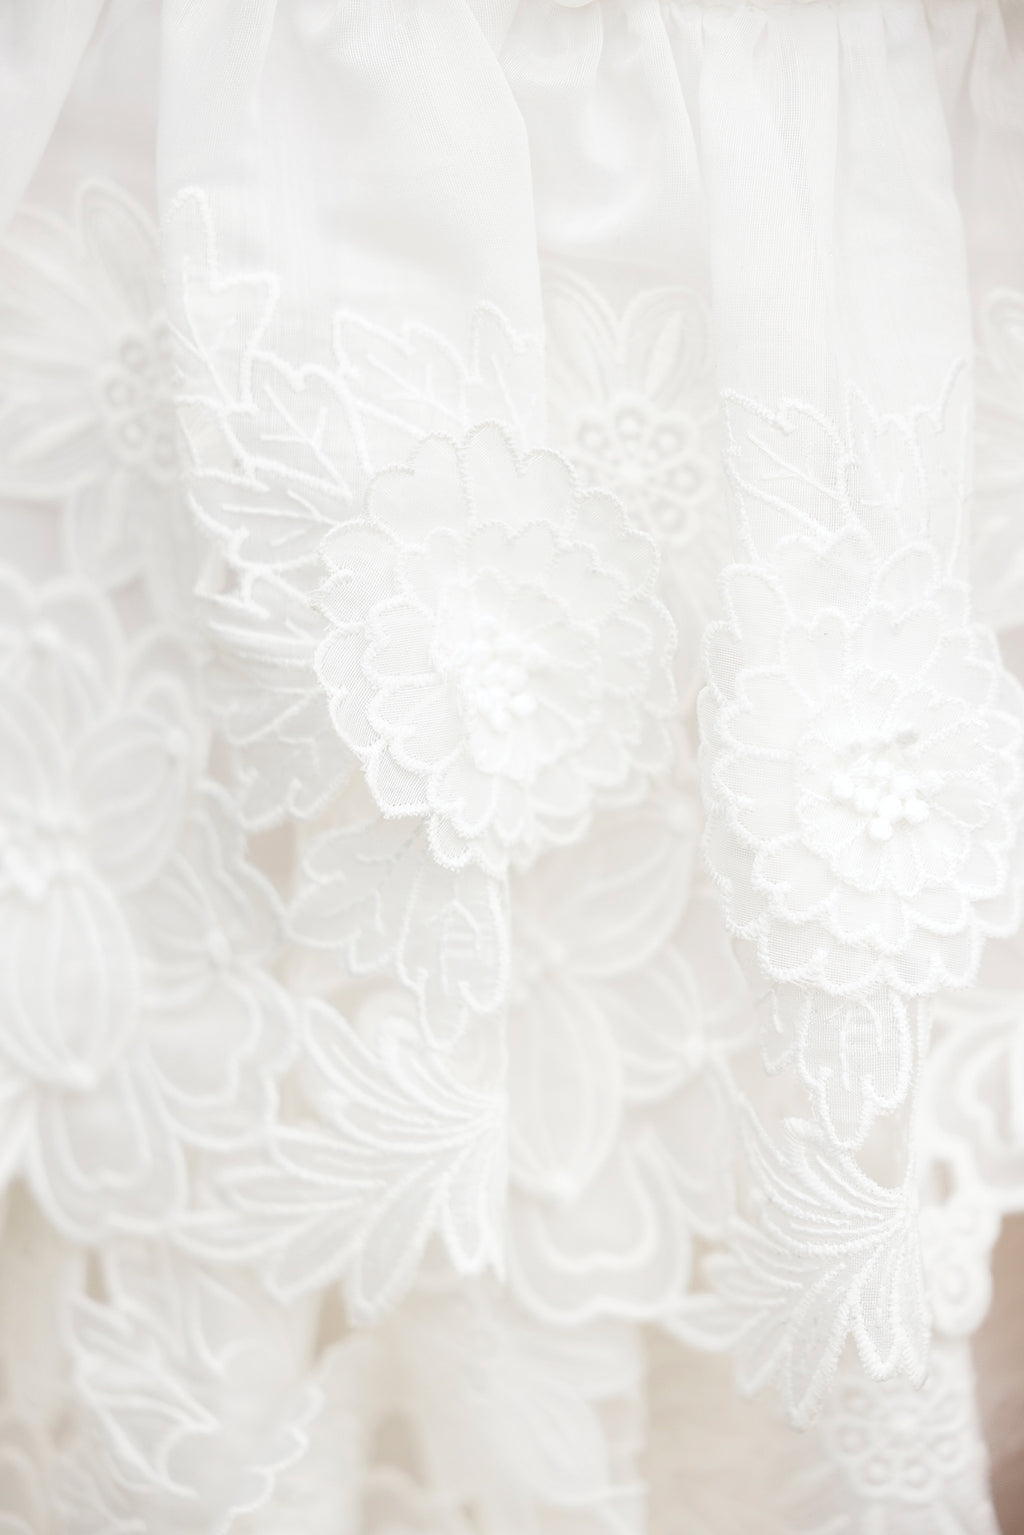 Robe - Blanc broderies relief